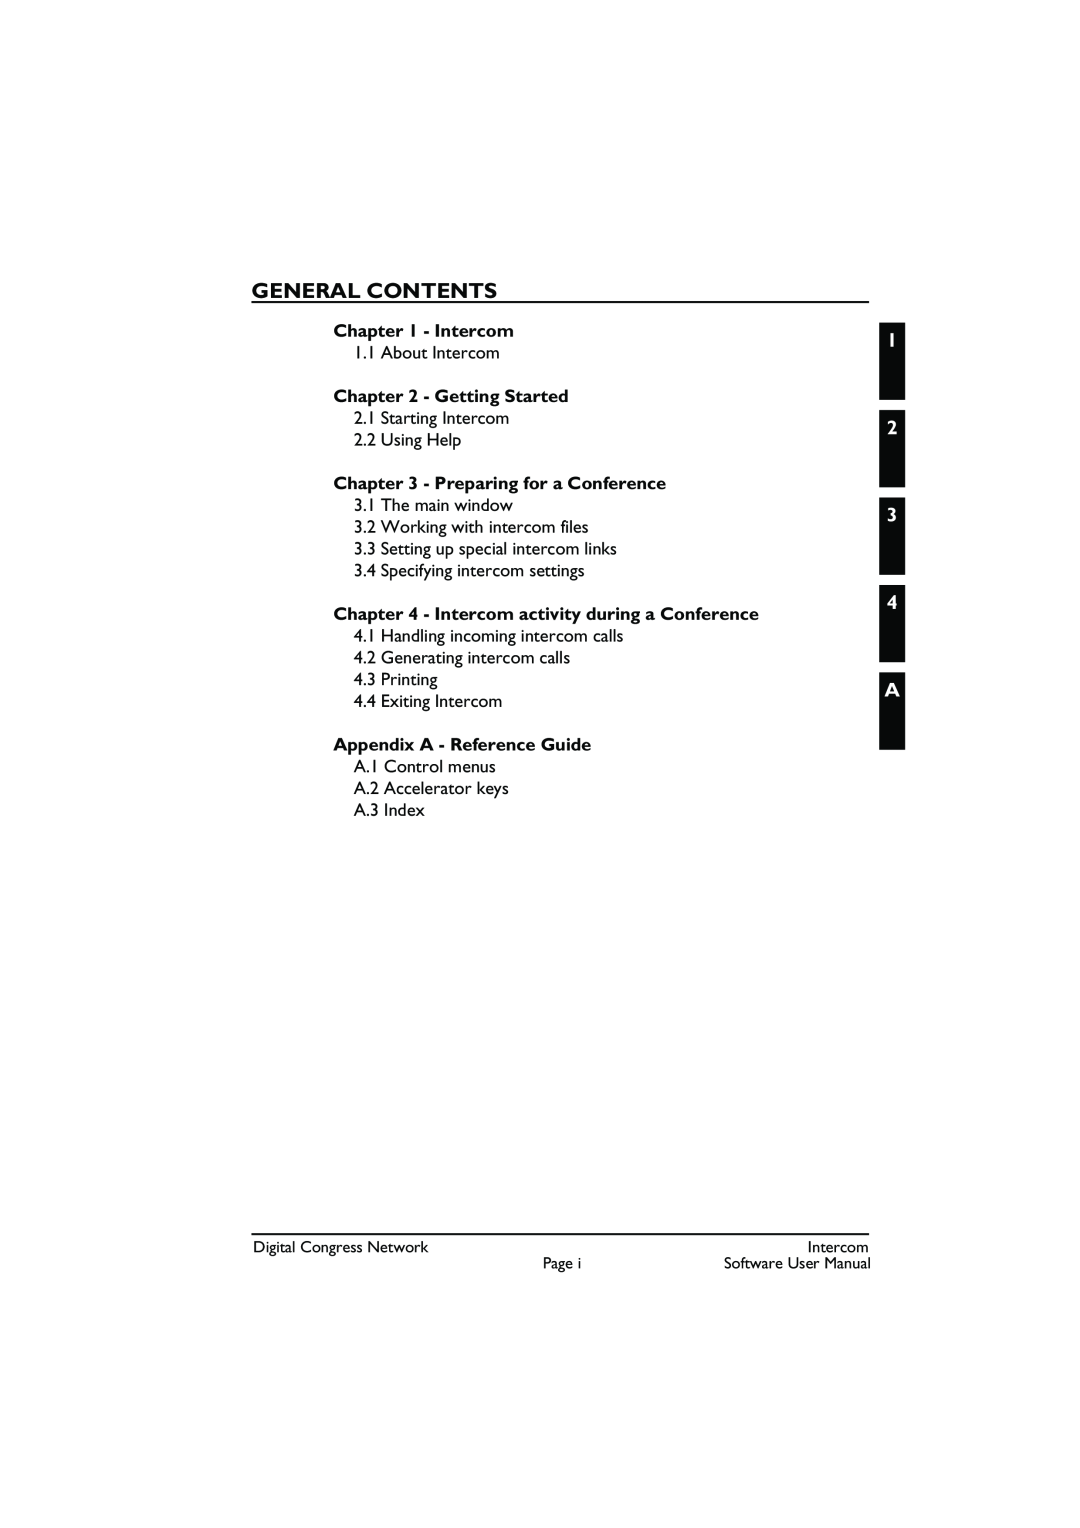 Bosch Appliances LBB 3573 user manual General Contents, 1 2 3 4 A, Intercom, Getting Started, Preparing for a Conference 